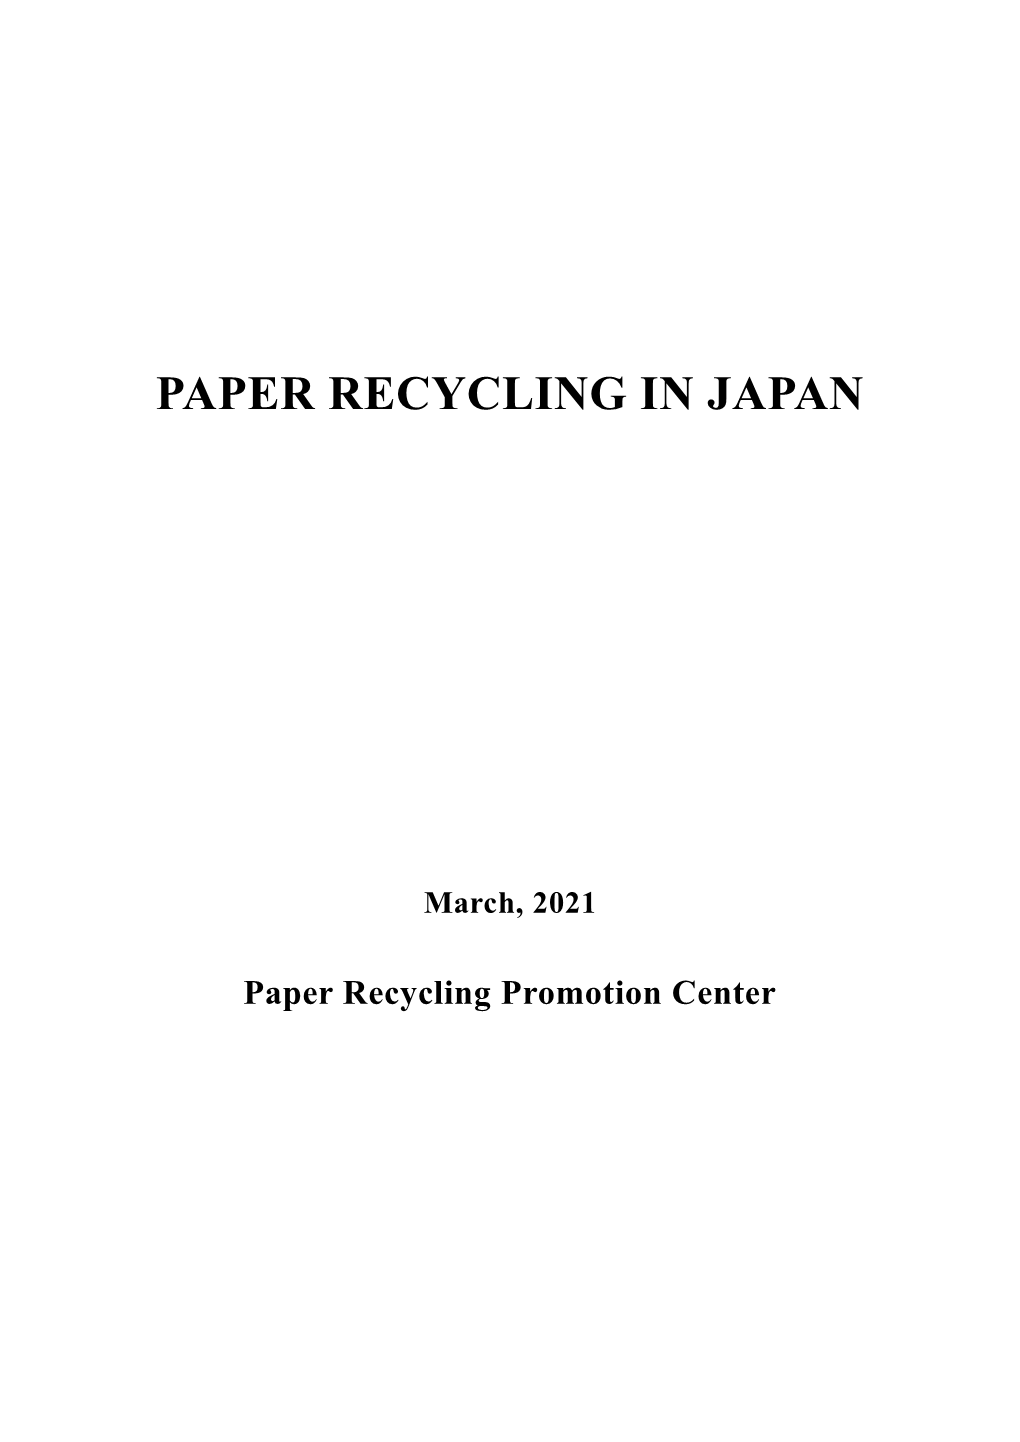 Paper Recycling in Japan